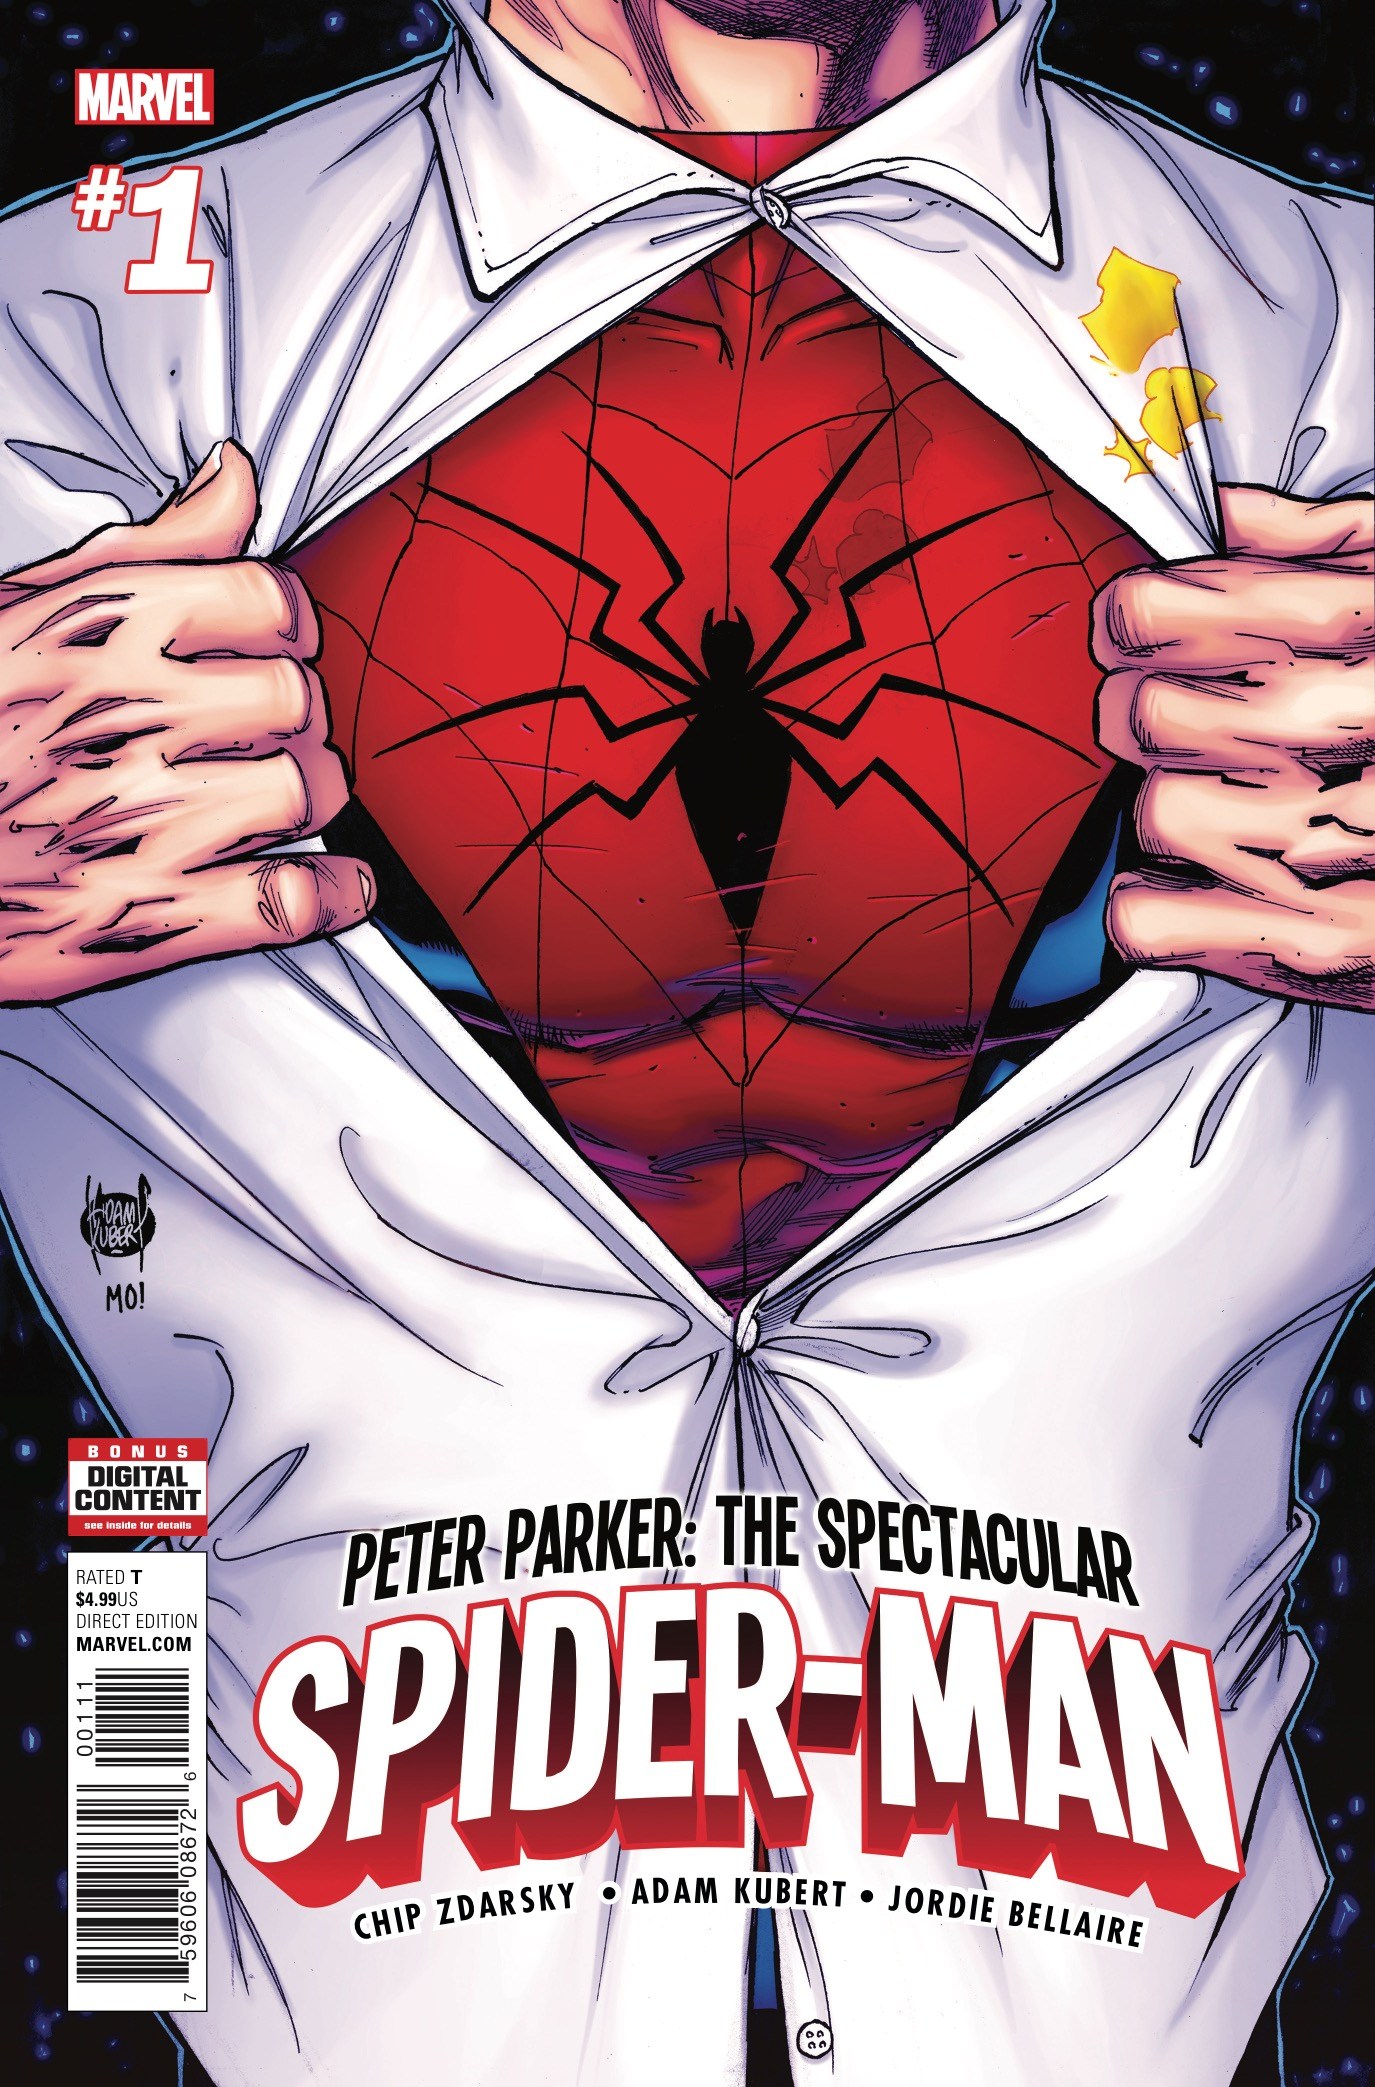 Peter Parker: The Spectacular Spider-Man #1 Review